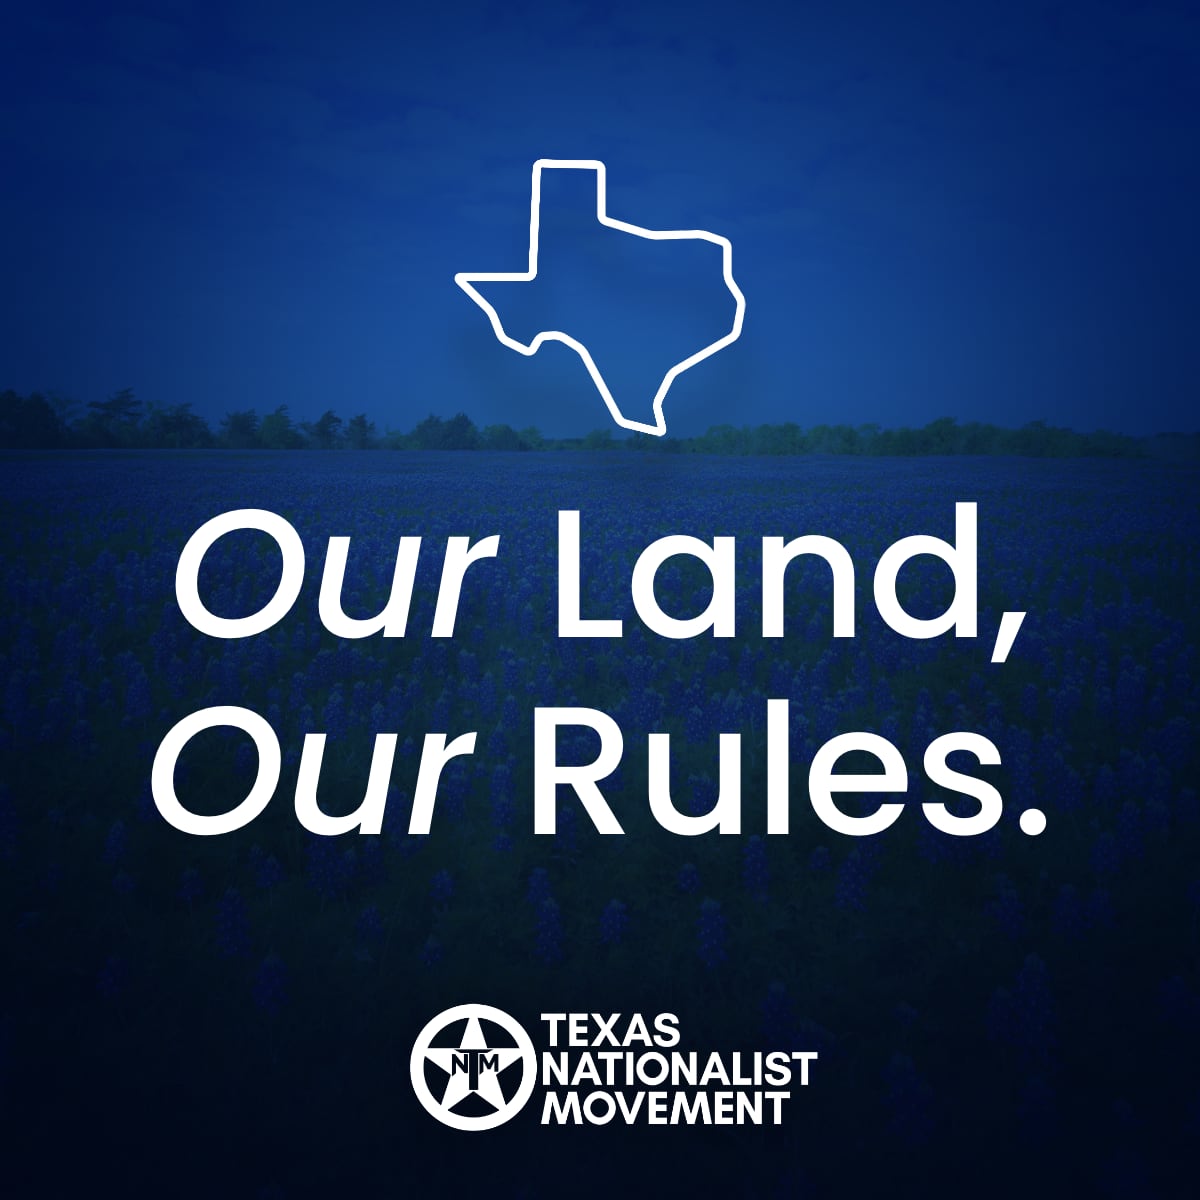 Texans should be the only ones making rules about what happens in our state.